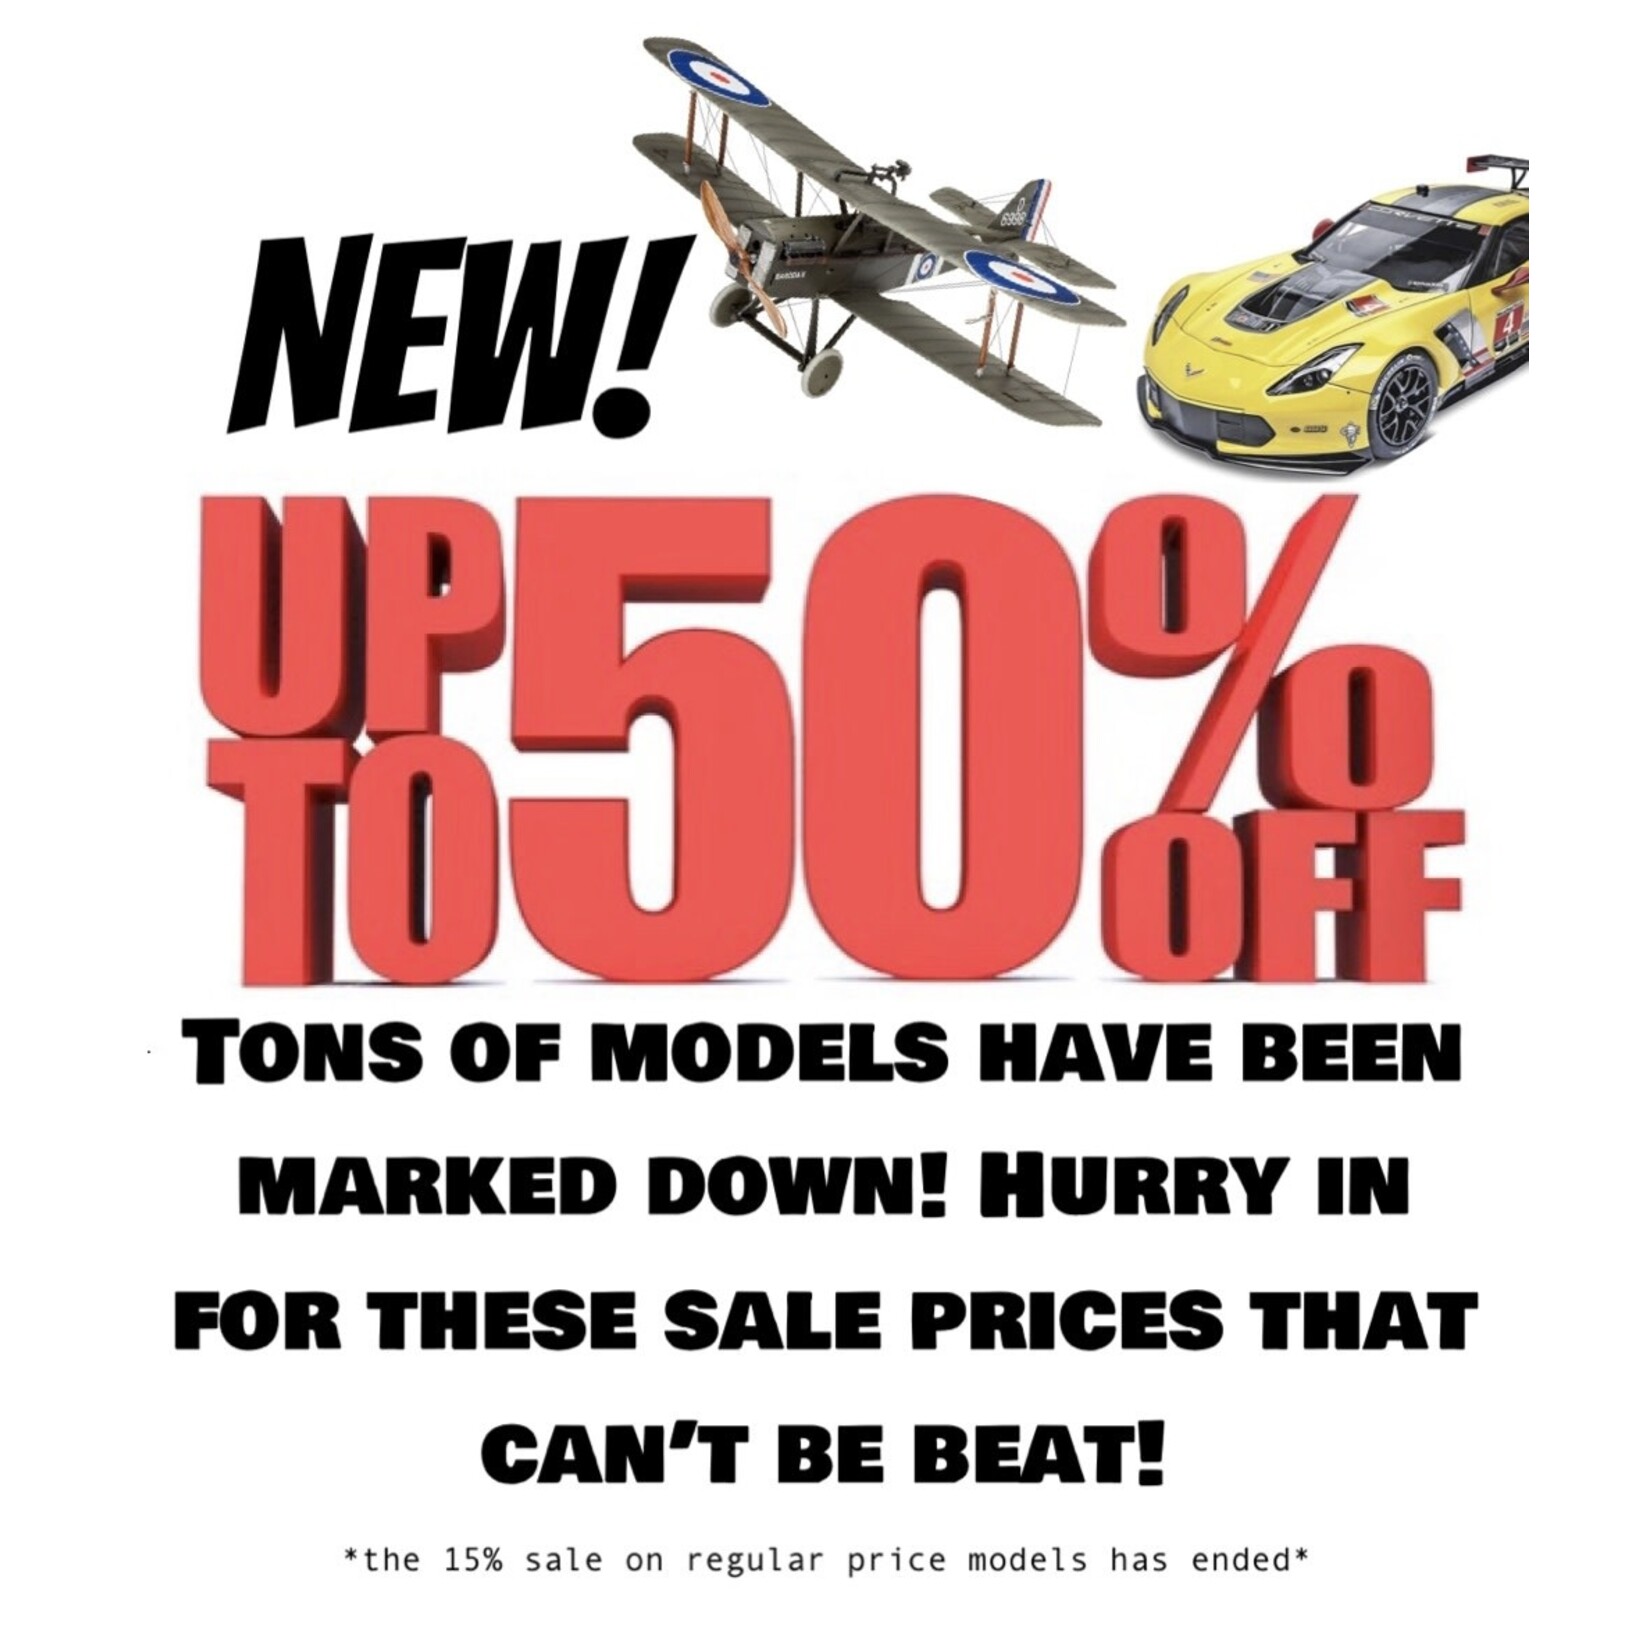 Up to 50% off!